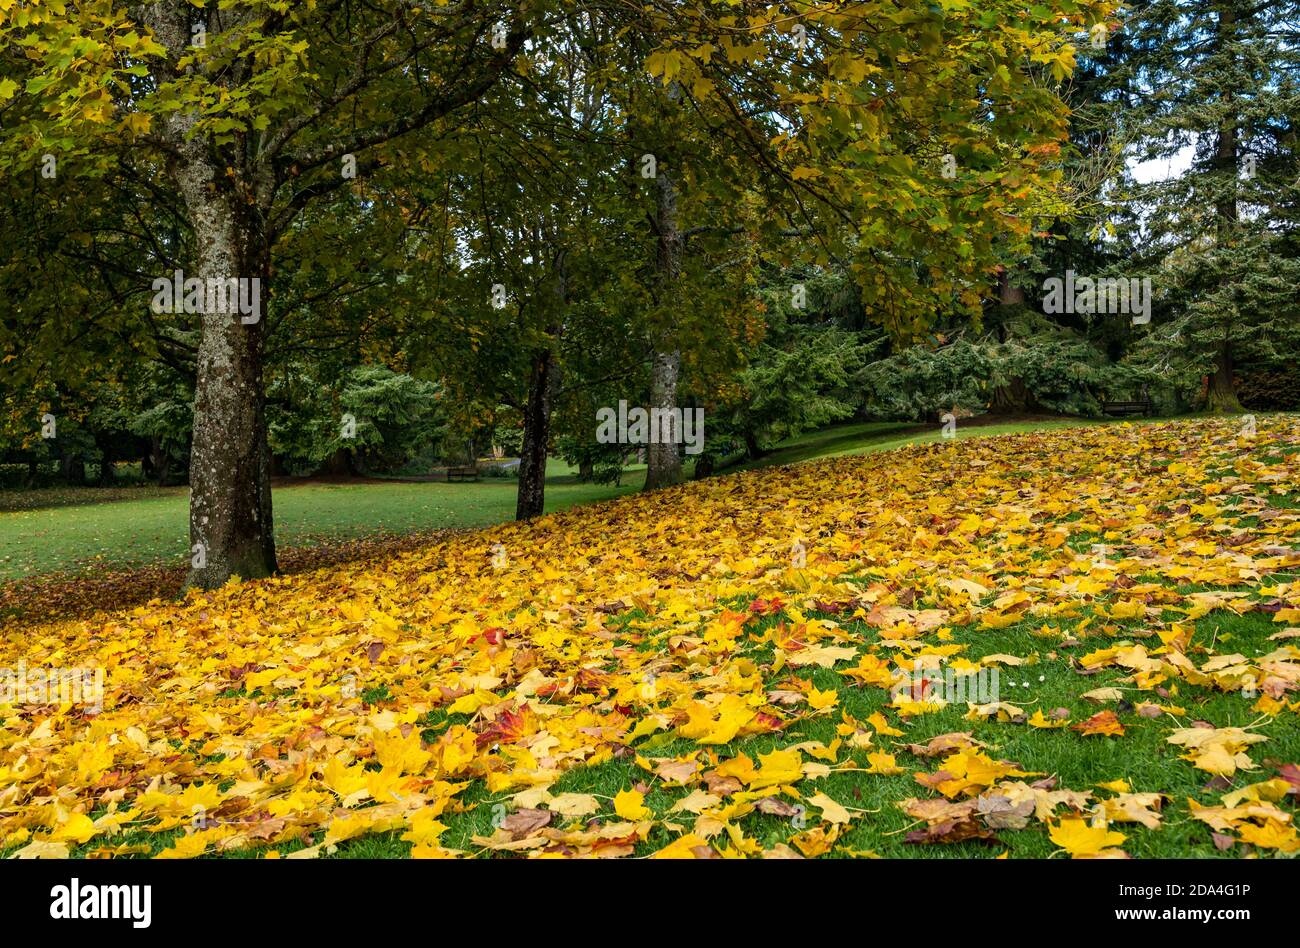 Autumn maple tree with a carpet of leaves covering the ground, MacRosty Park, Crieff, Perthshire, Scotland, UK Stock Photo